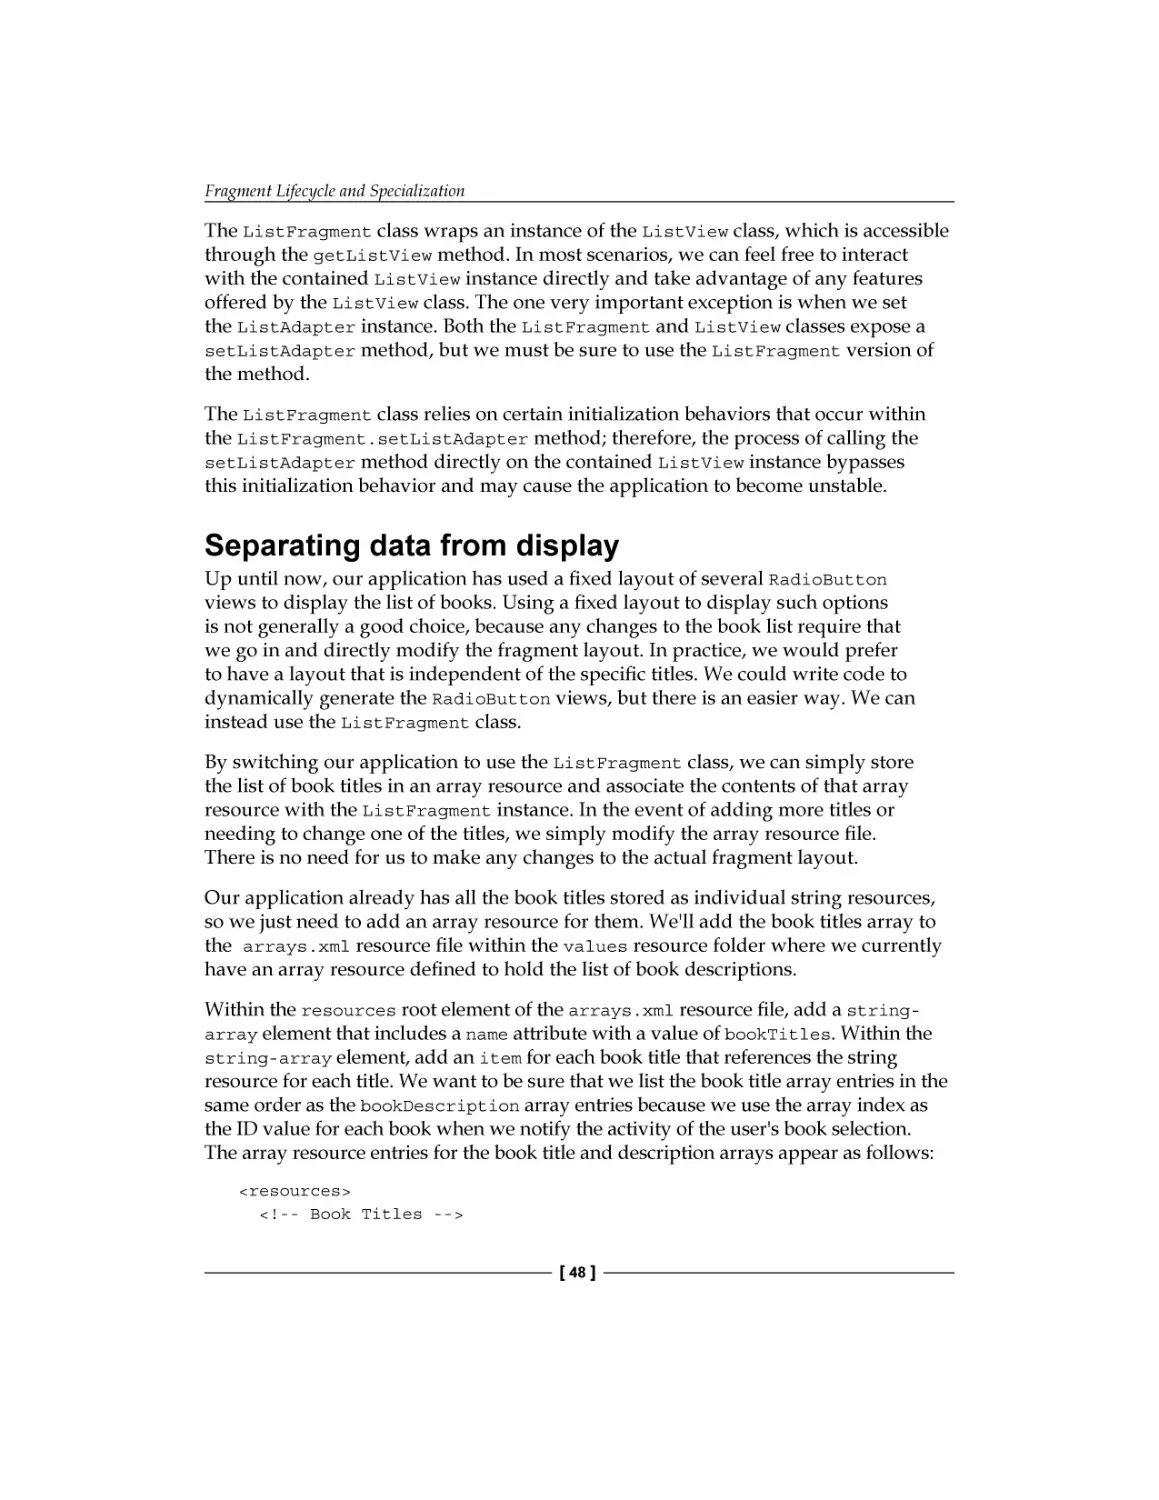 Separating data from display